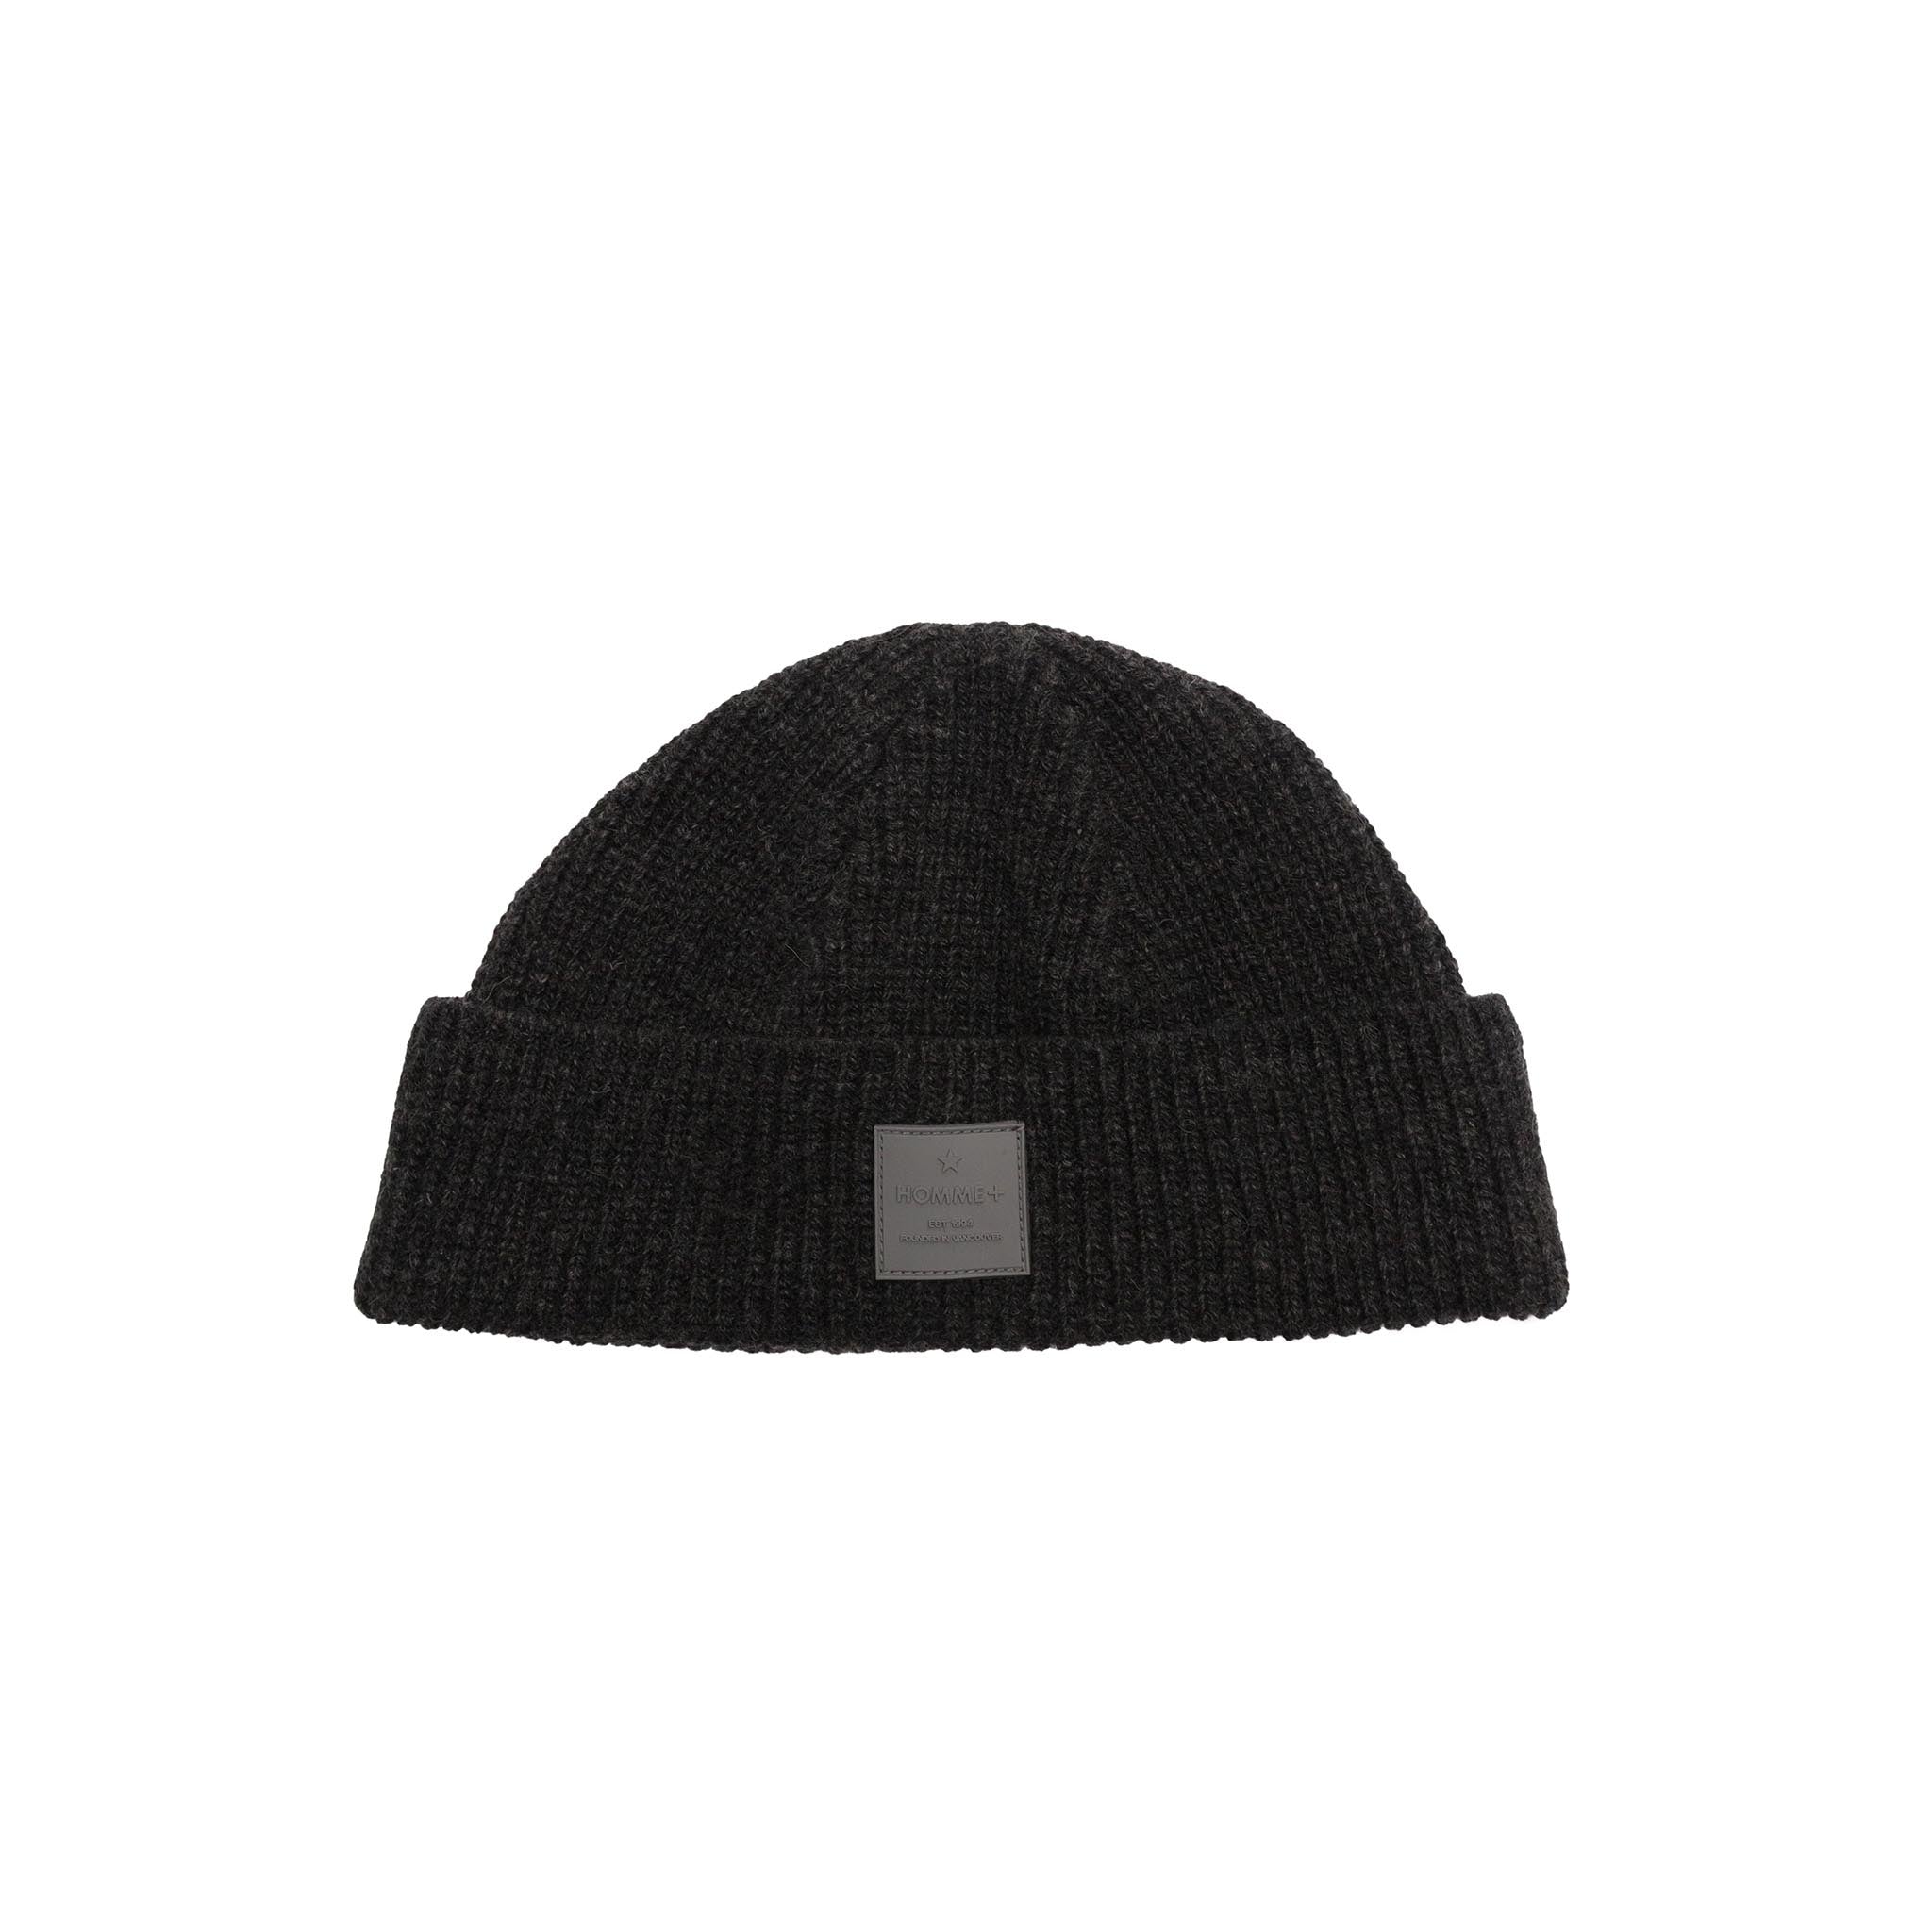 HOMME+ Patch Beanie Charcoal